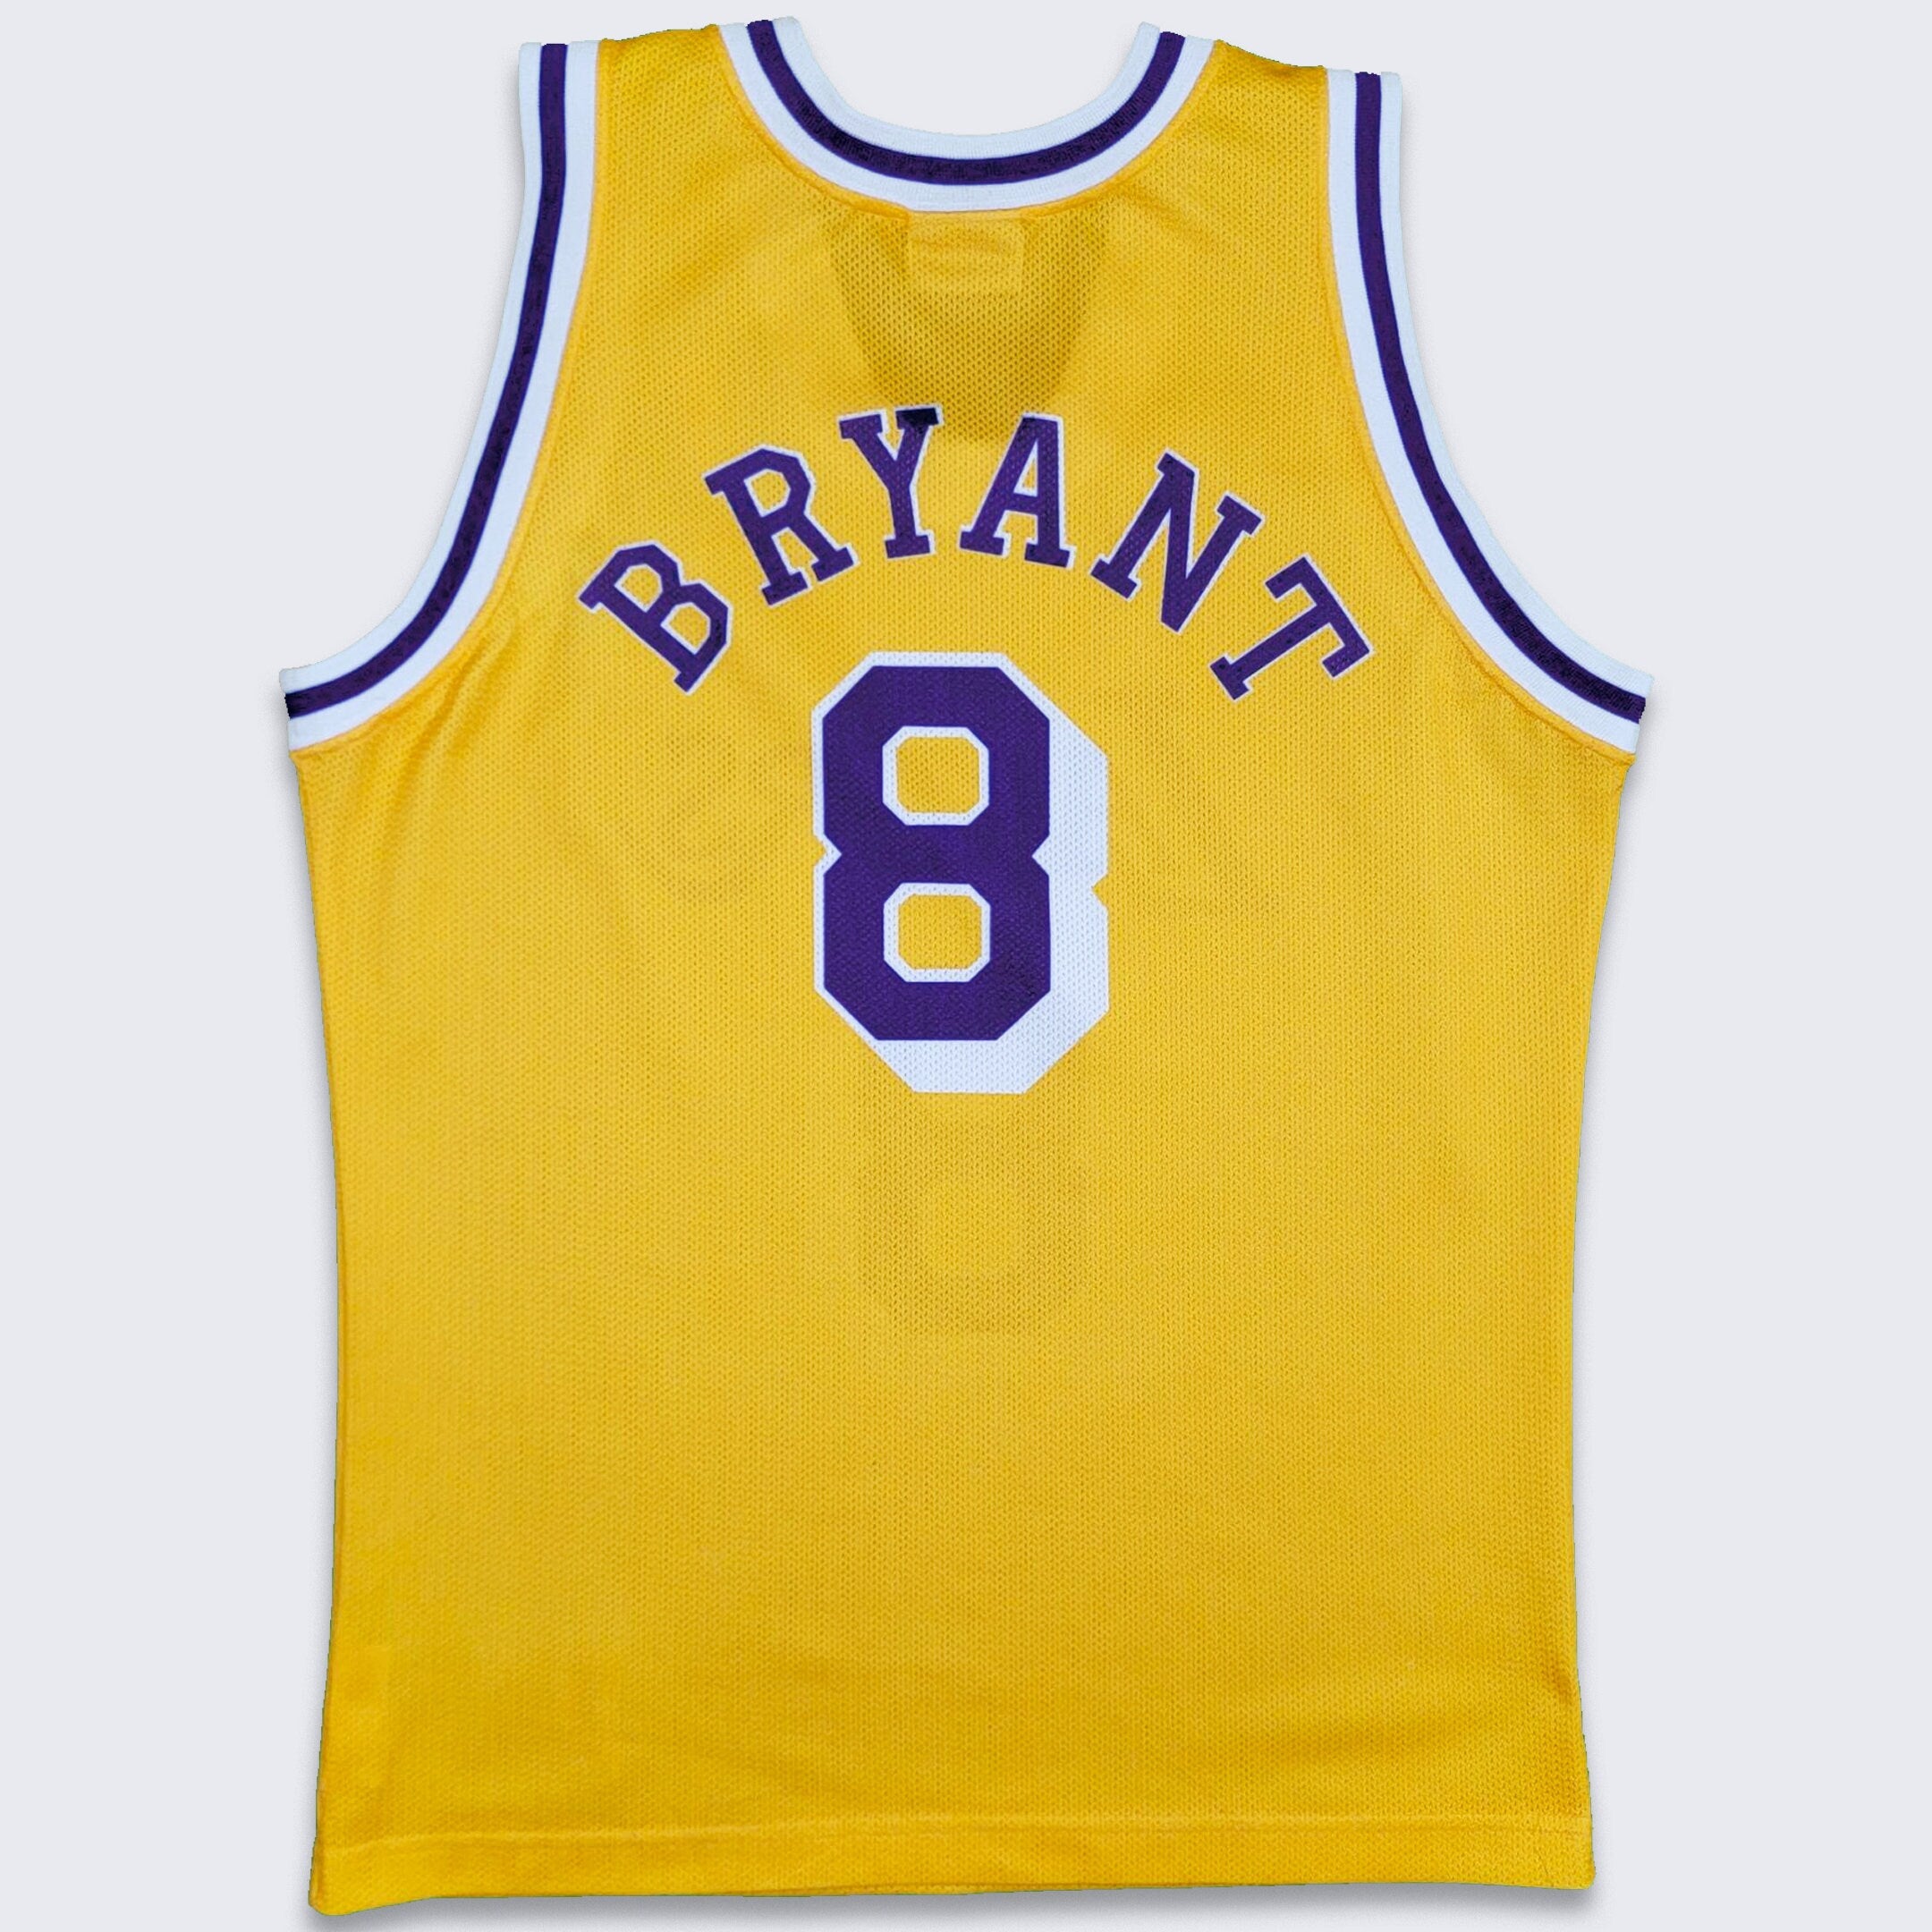  Men's #9 Classic Vintage Throwback #9 Basketball Movie Jersey  Basketball Jersey S-XXXL Yellow,Stitched Letters and Numbers (as1, Alpha,  s, Regular, Regular) : Clothing, Shoes & Jewelry